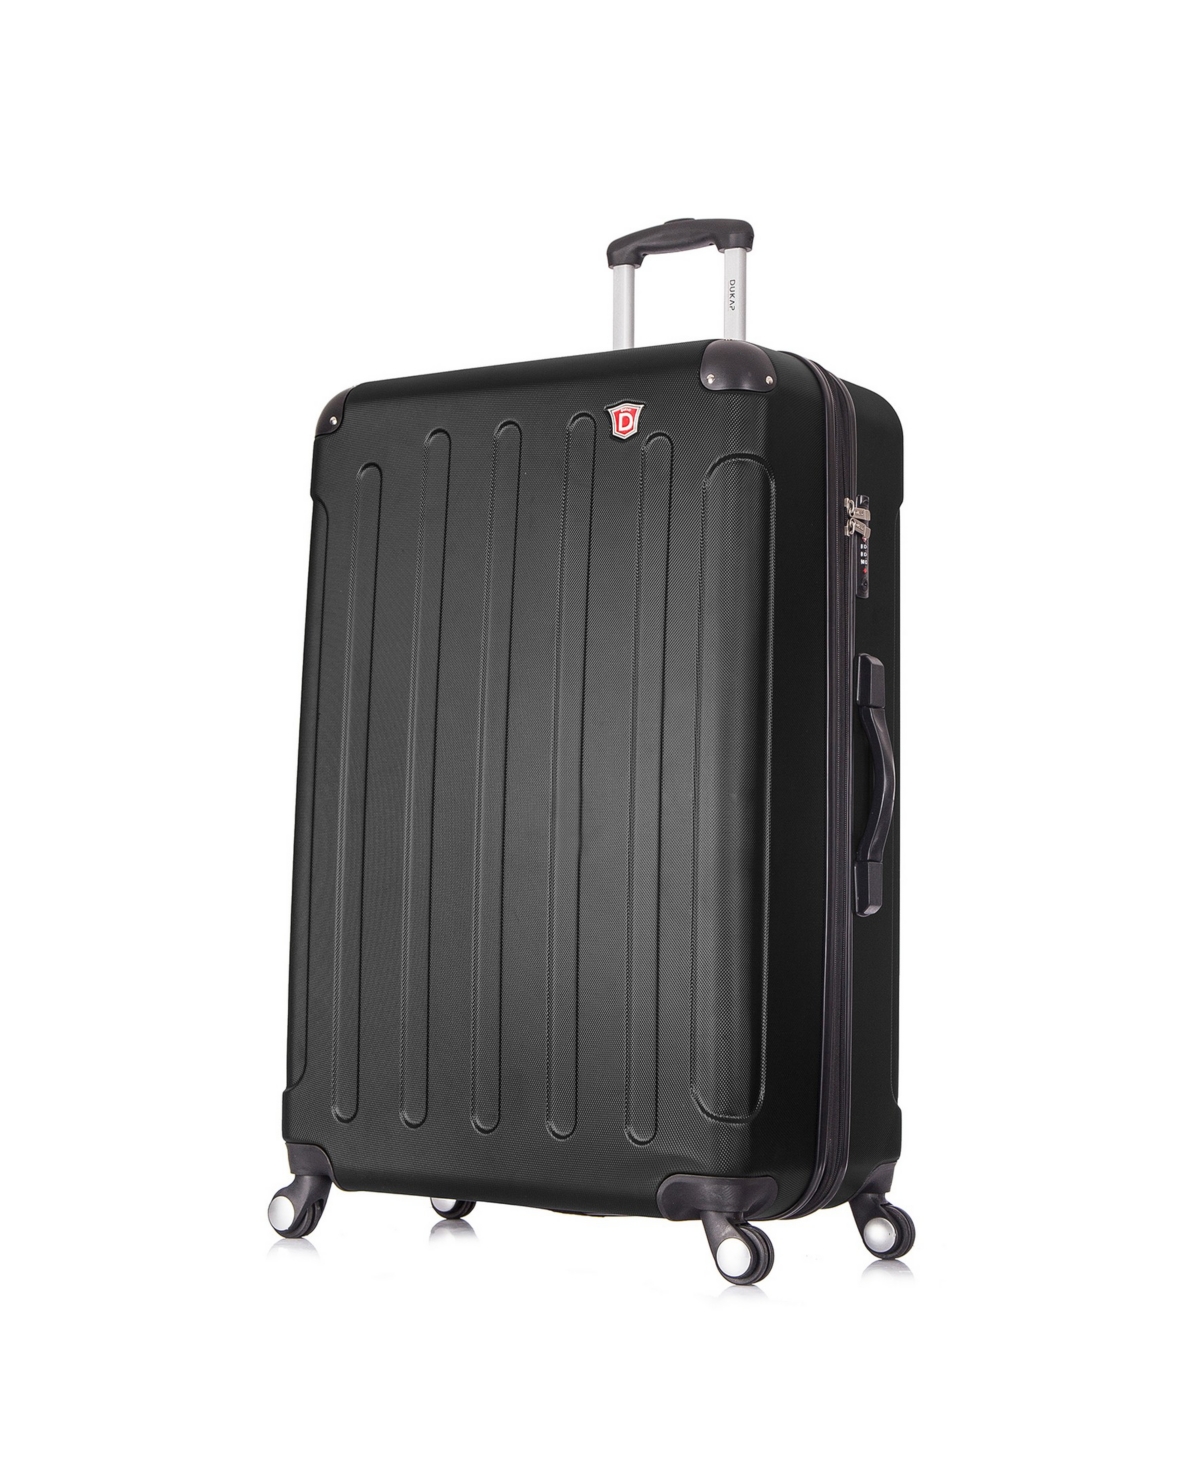 Intely 32" Hardside Spinner Luggage With Integrated Weight Scale - Grey